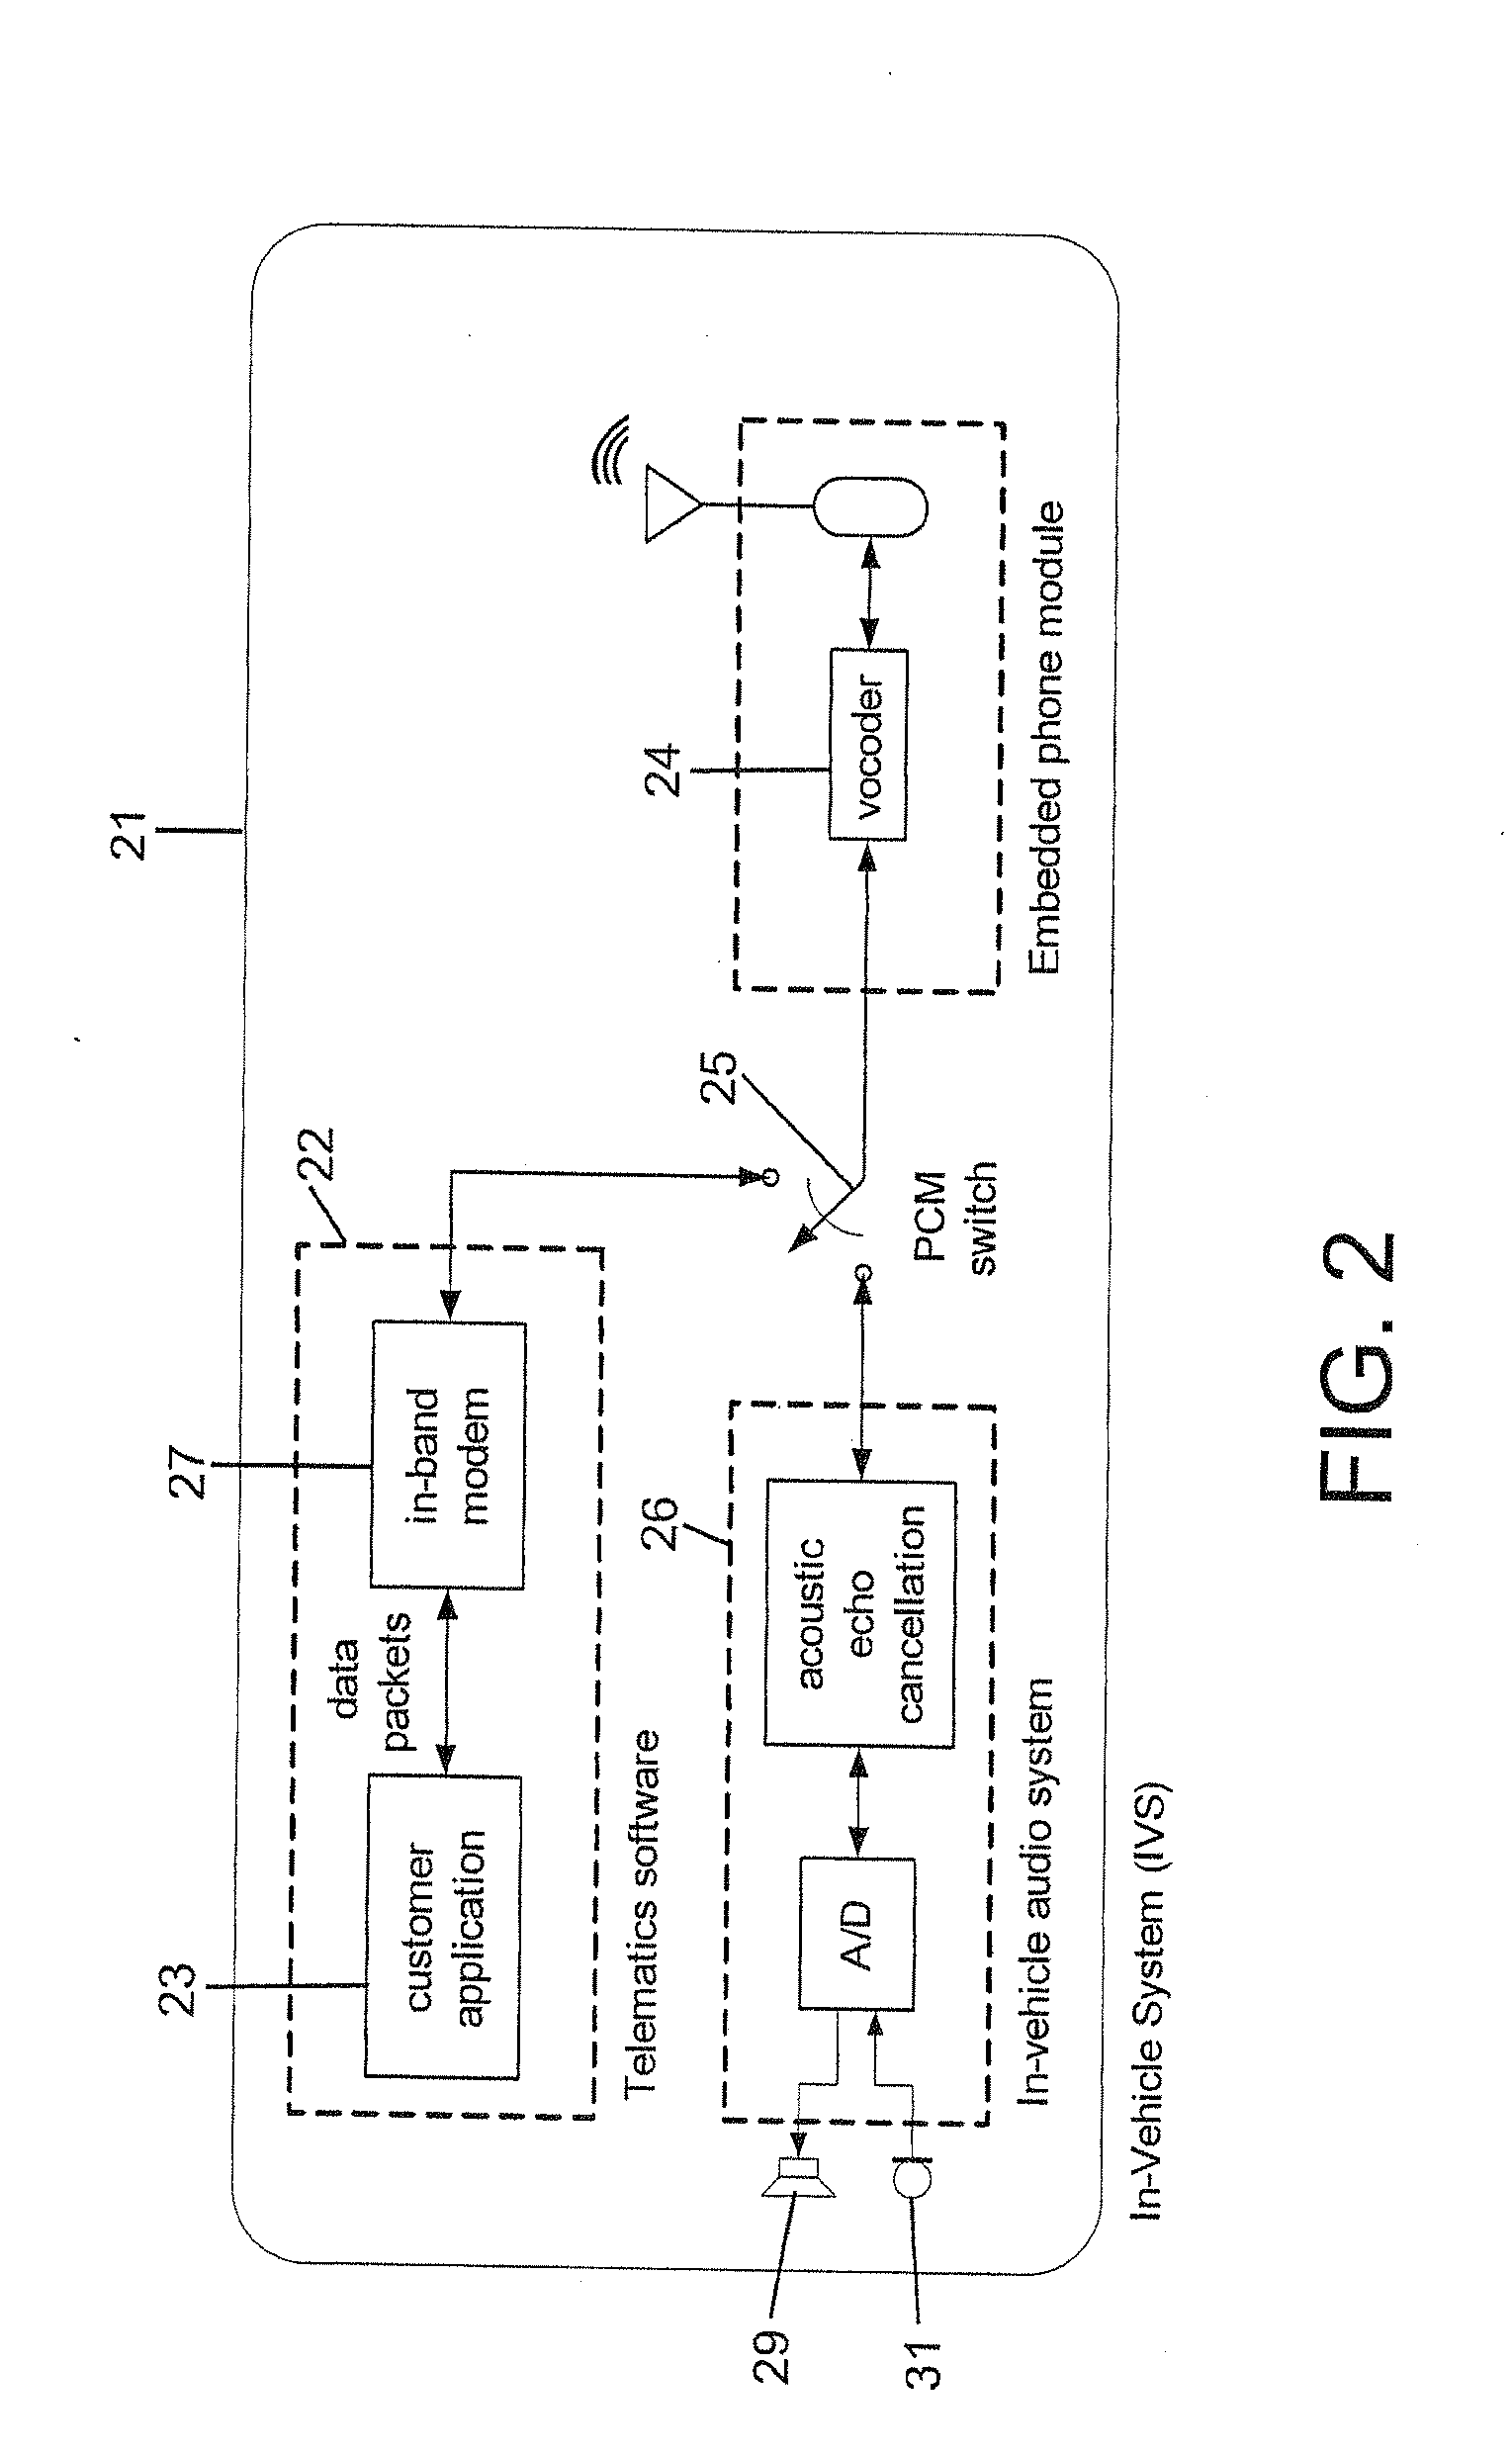 In-vehicle system (IVS) control of emergency data communications